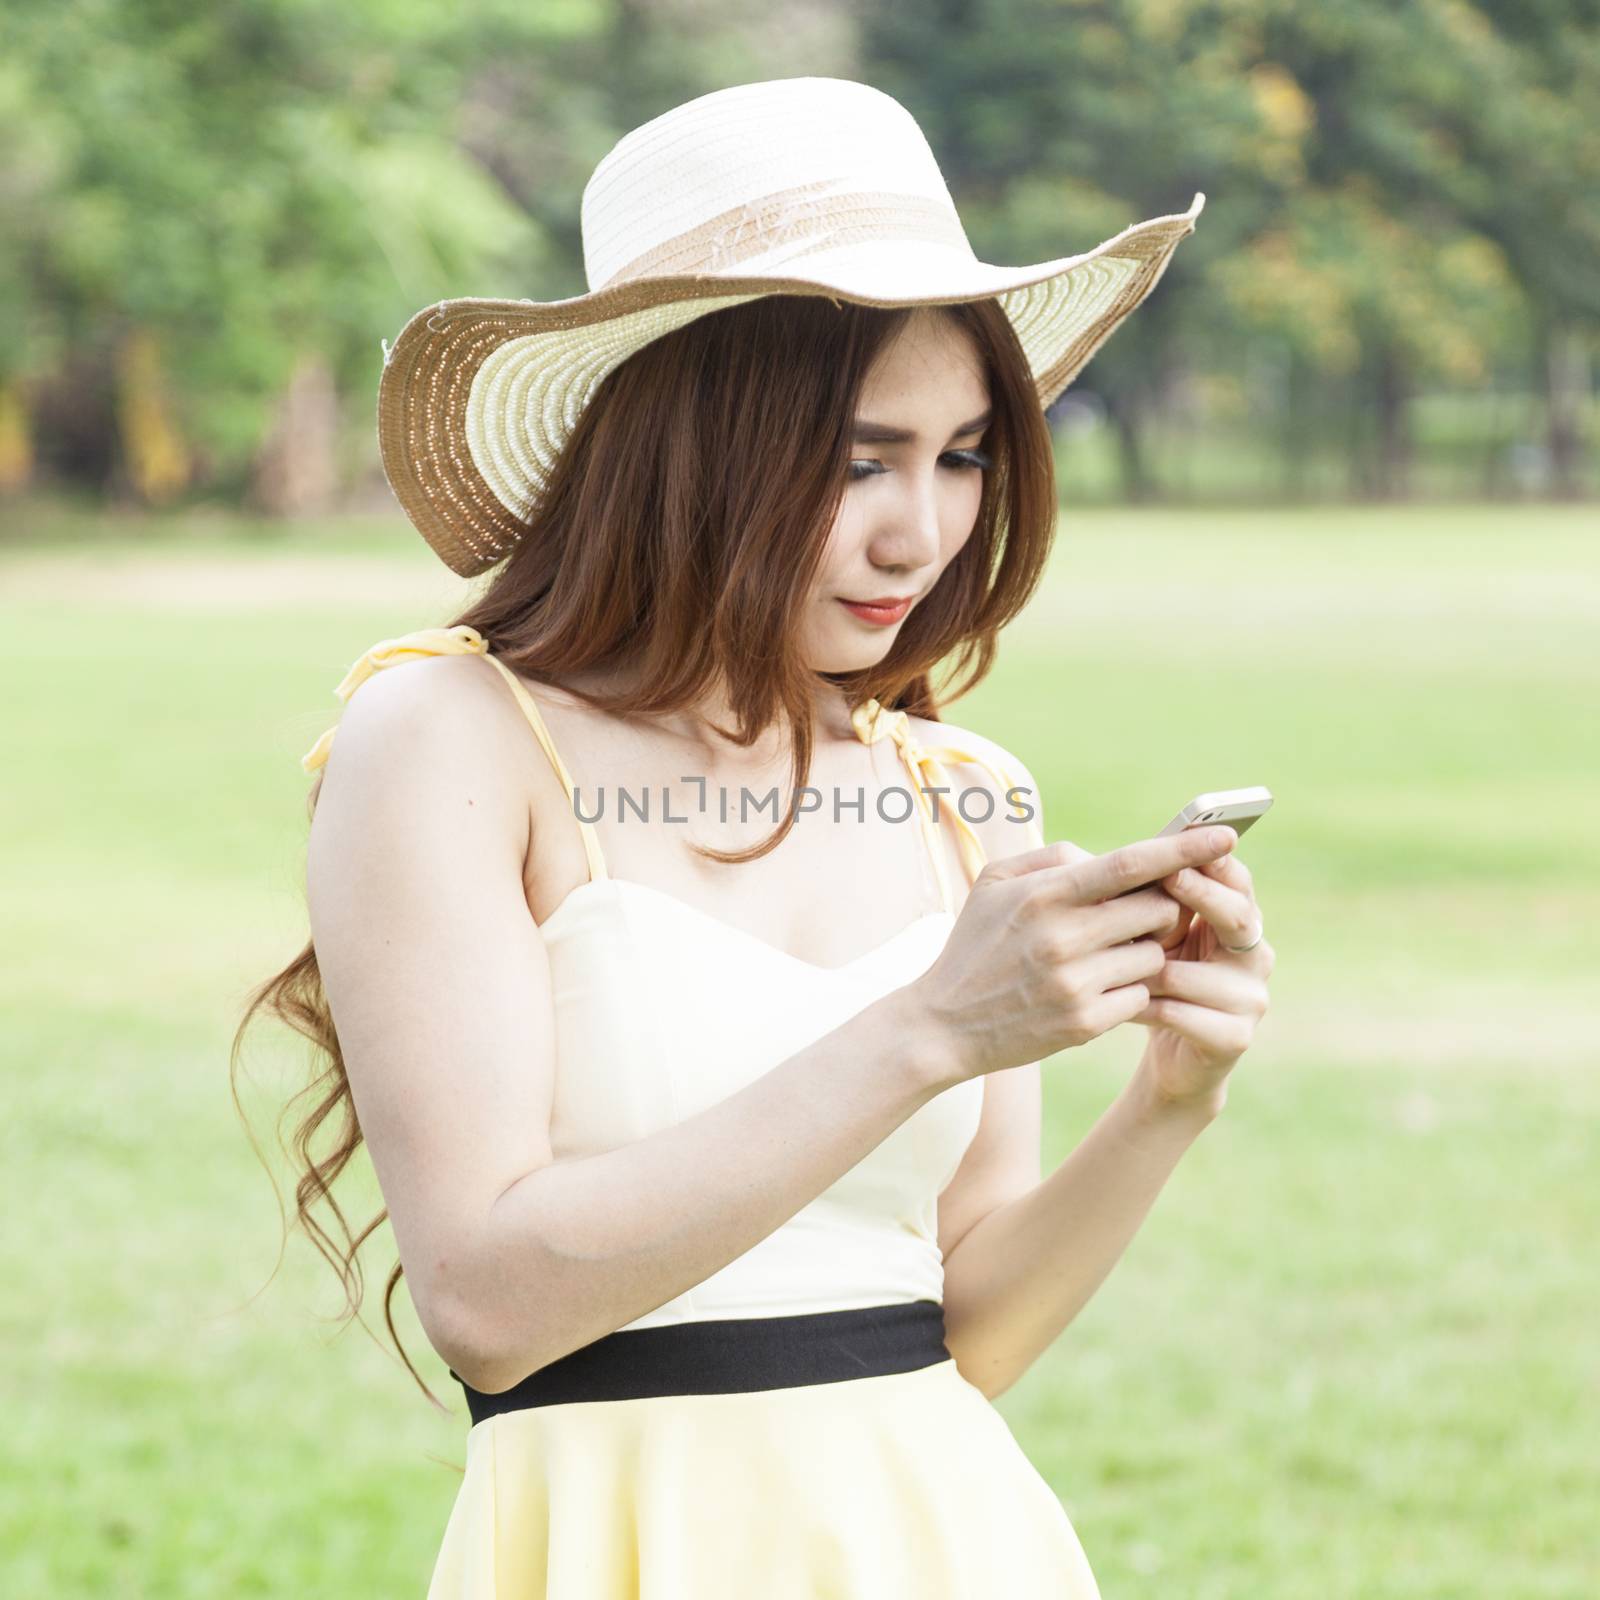 Woman playing smart phone. by a454